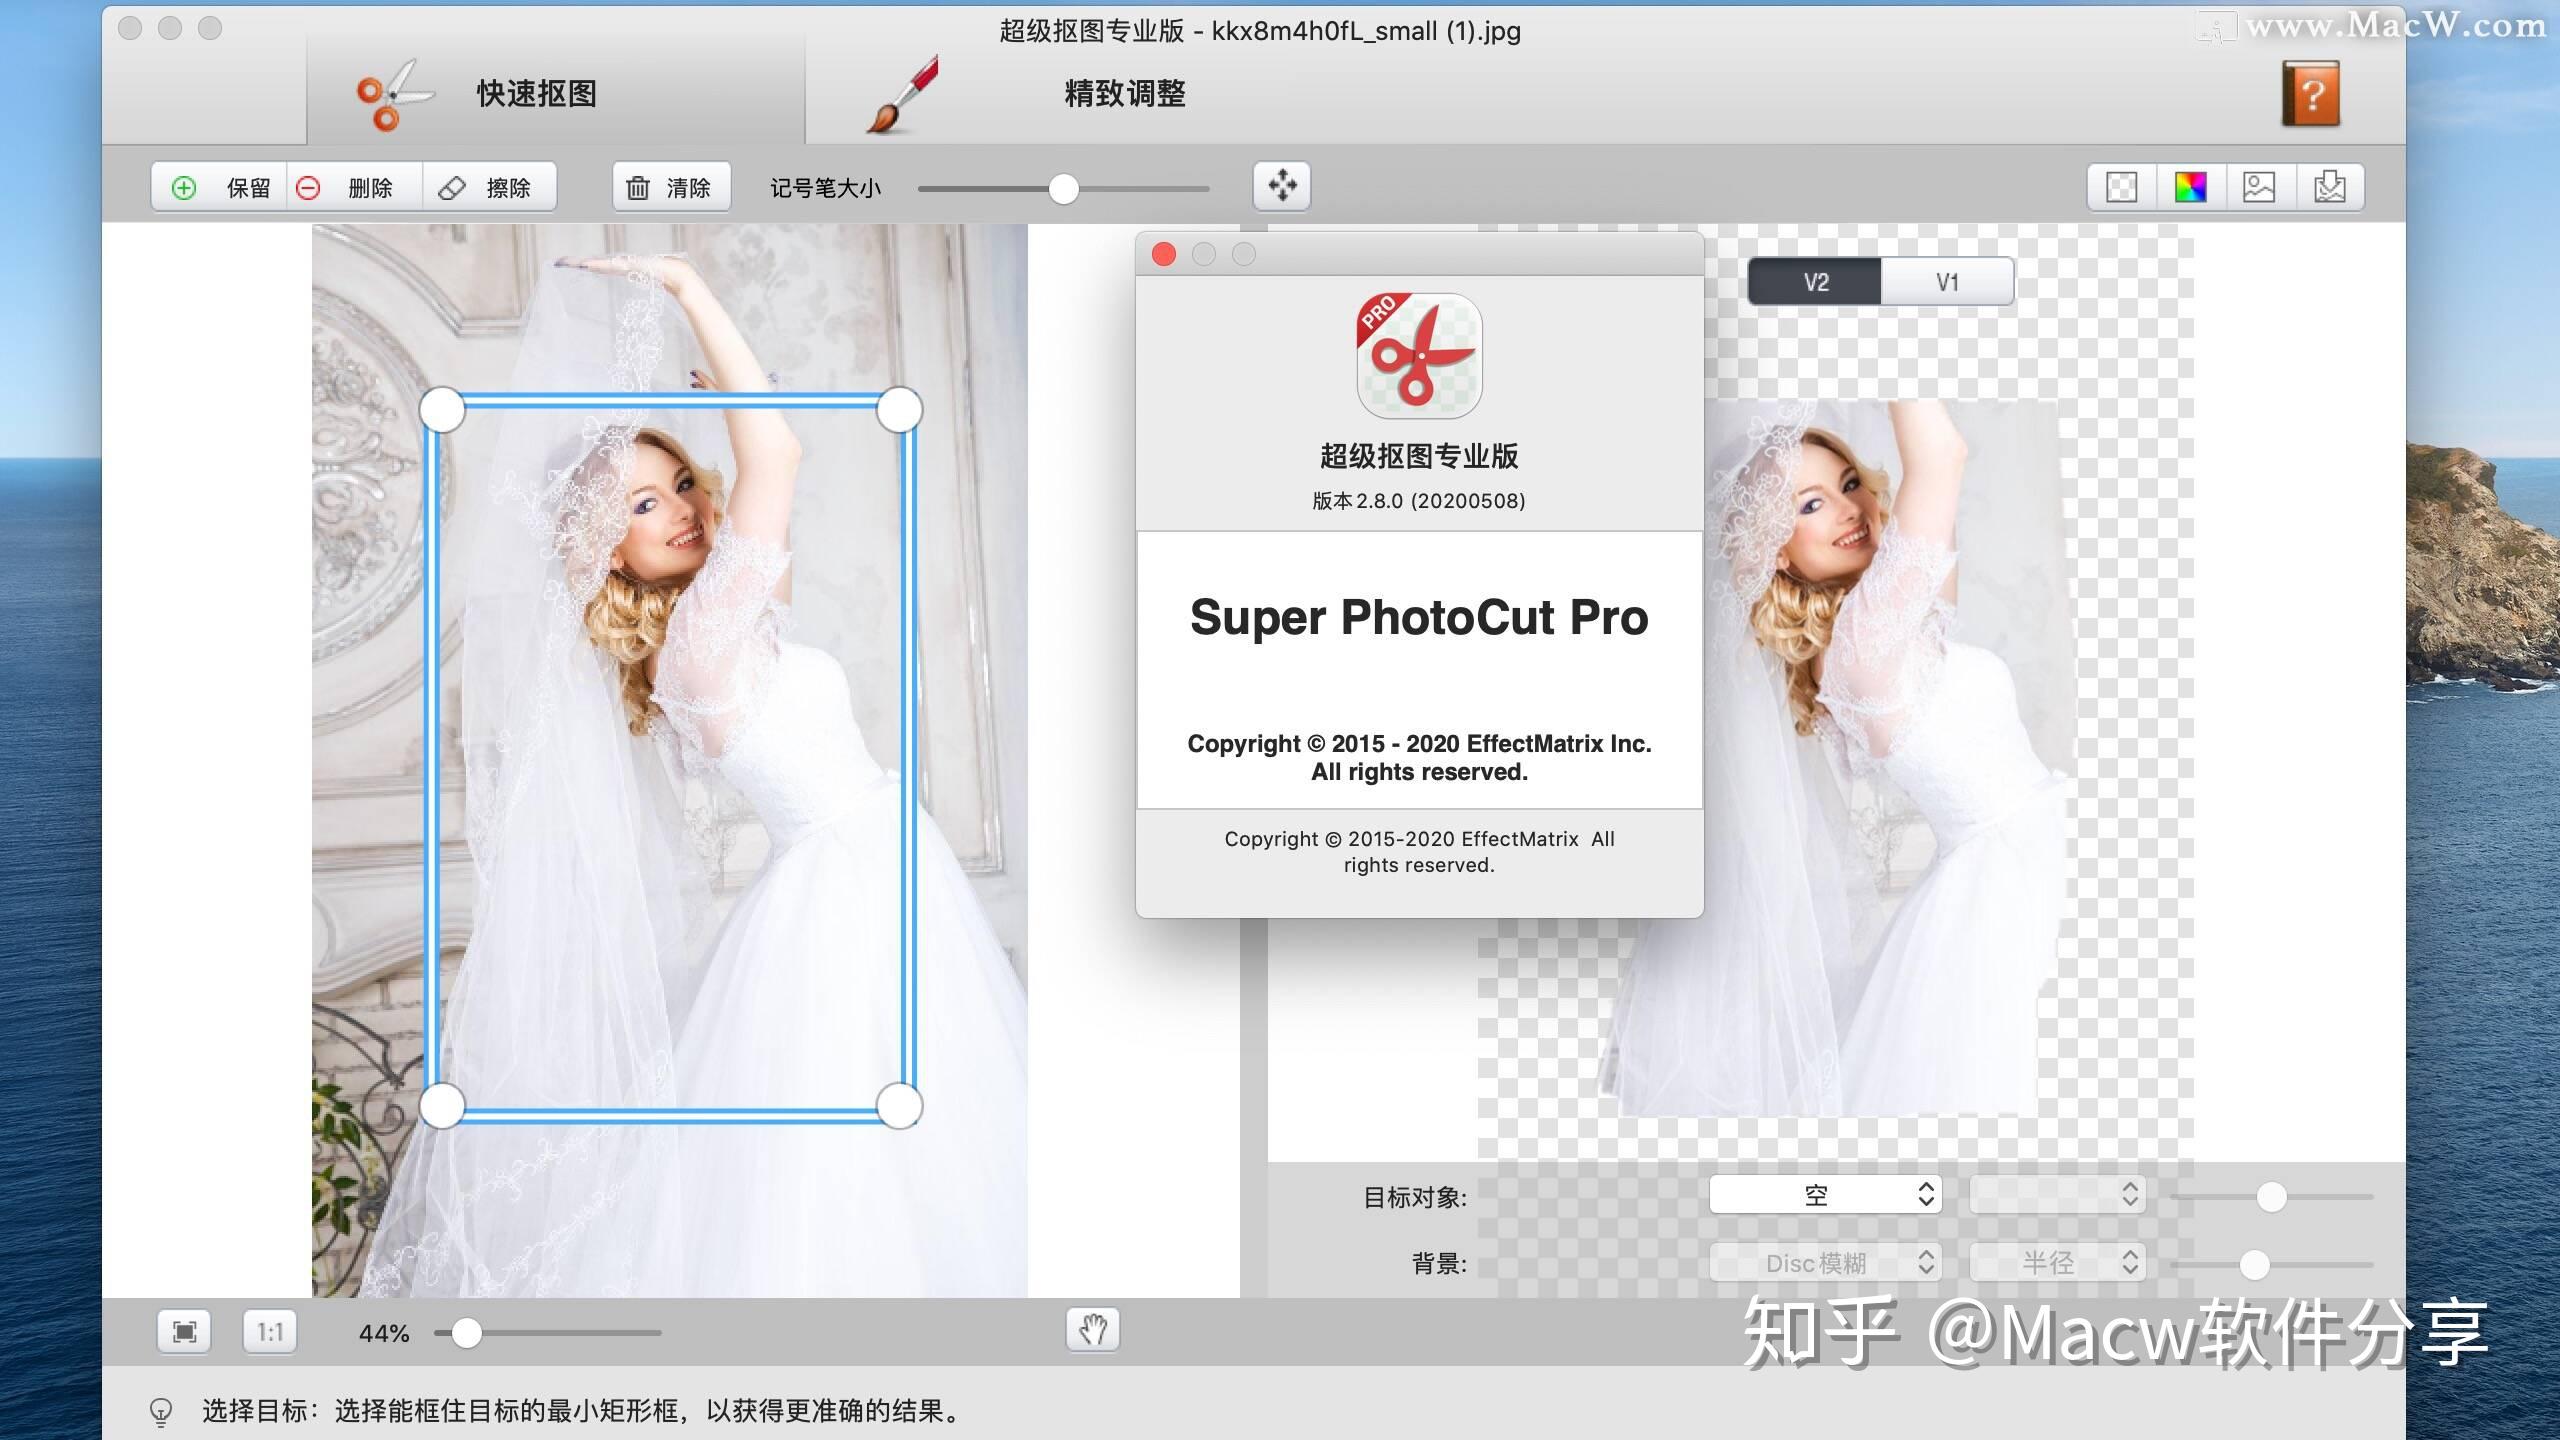 download the last version for android Super PhotoCut